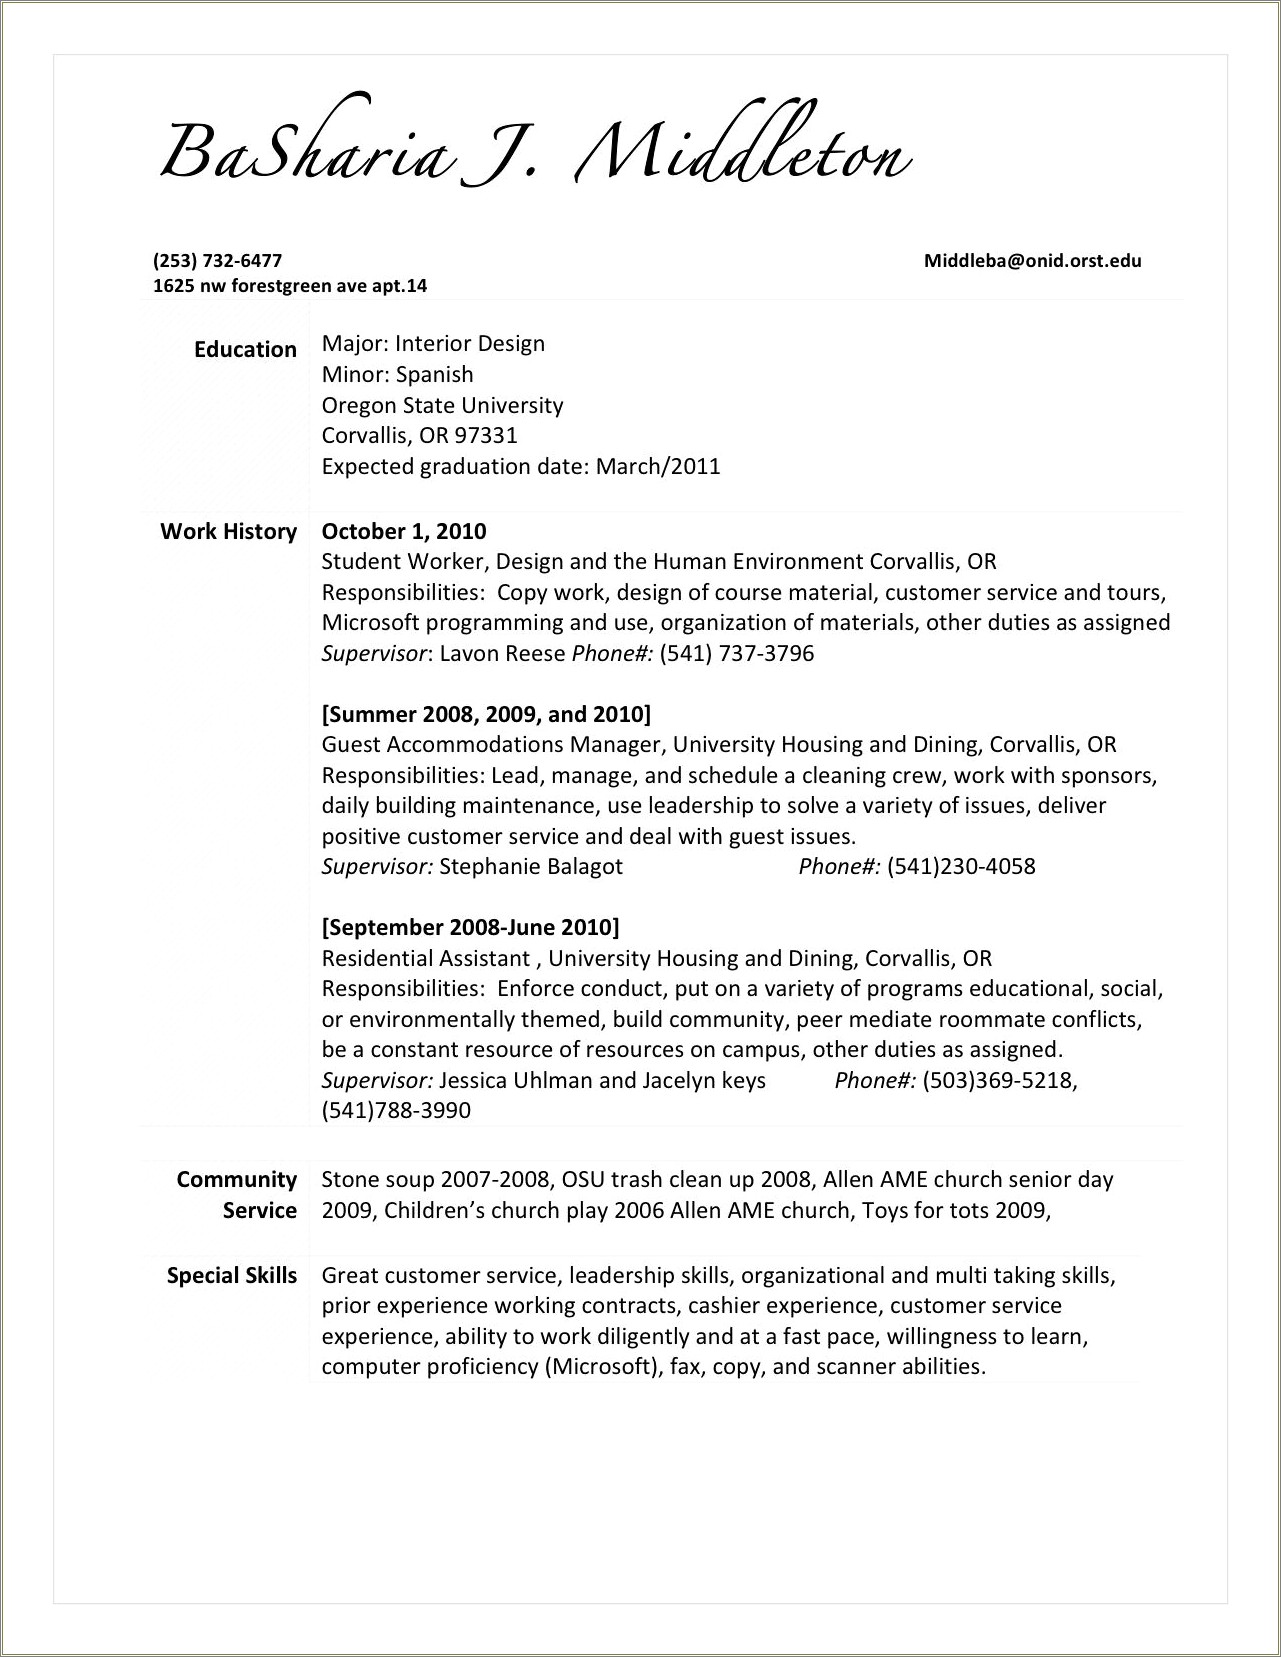 Resume Words For Voice Service Plat